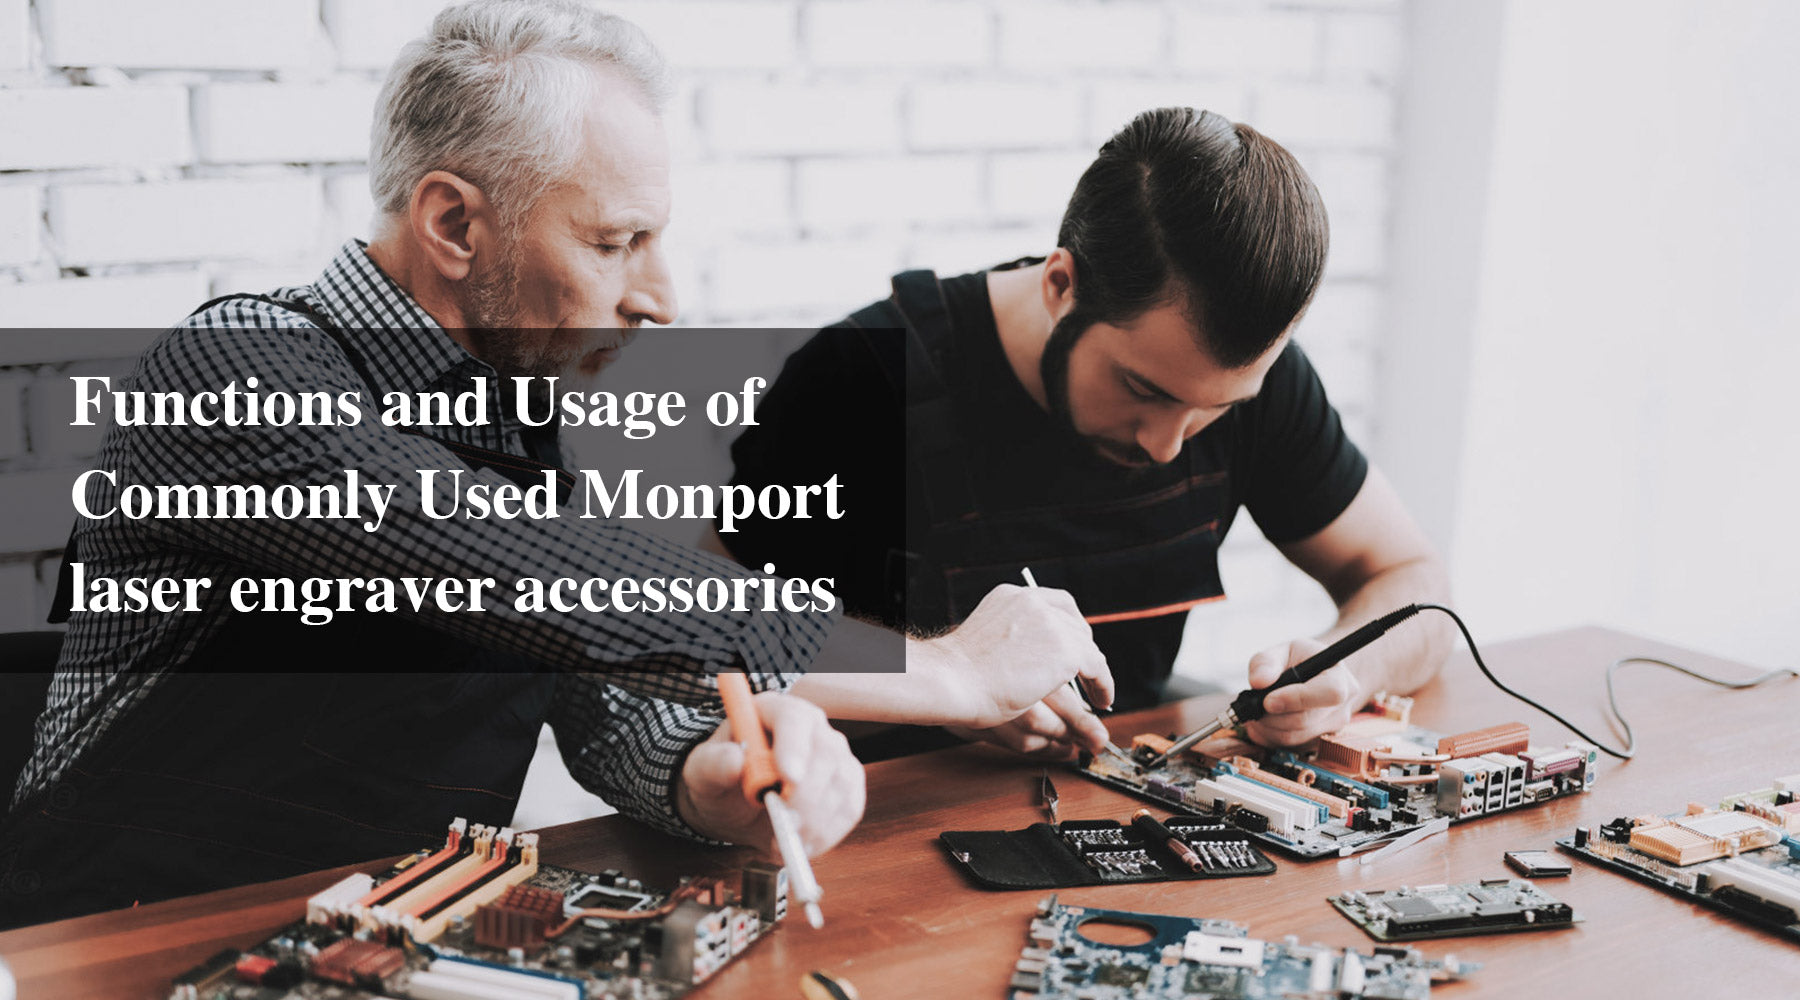 Functions and Usage of Commonly Used Monport laser engraver accessories